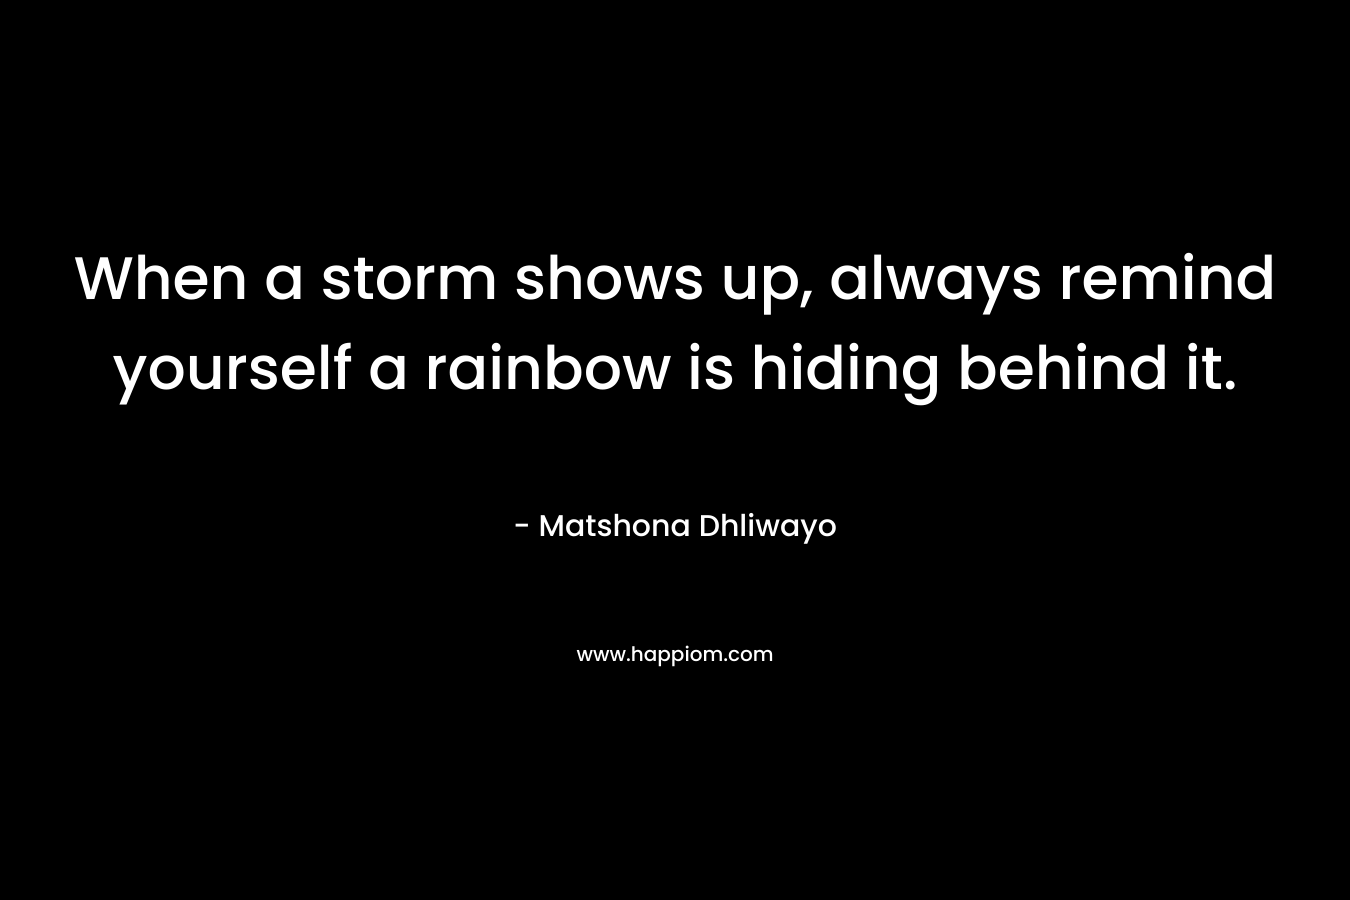 When a storm shows up, always remind yourself a rainbow is hiding behind it.